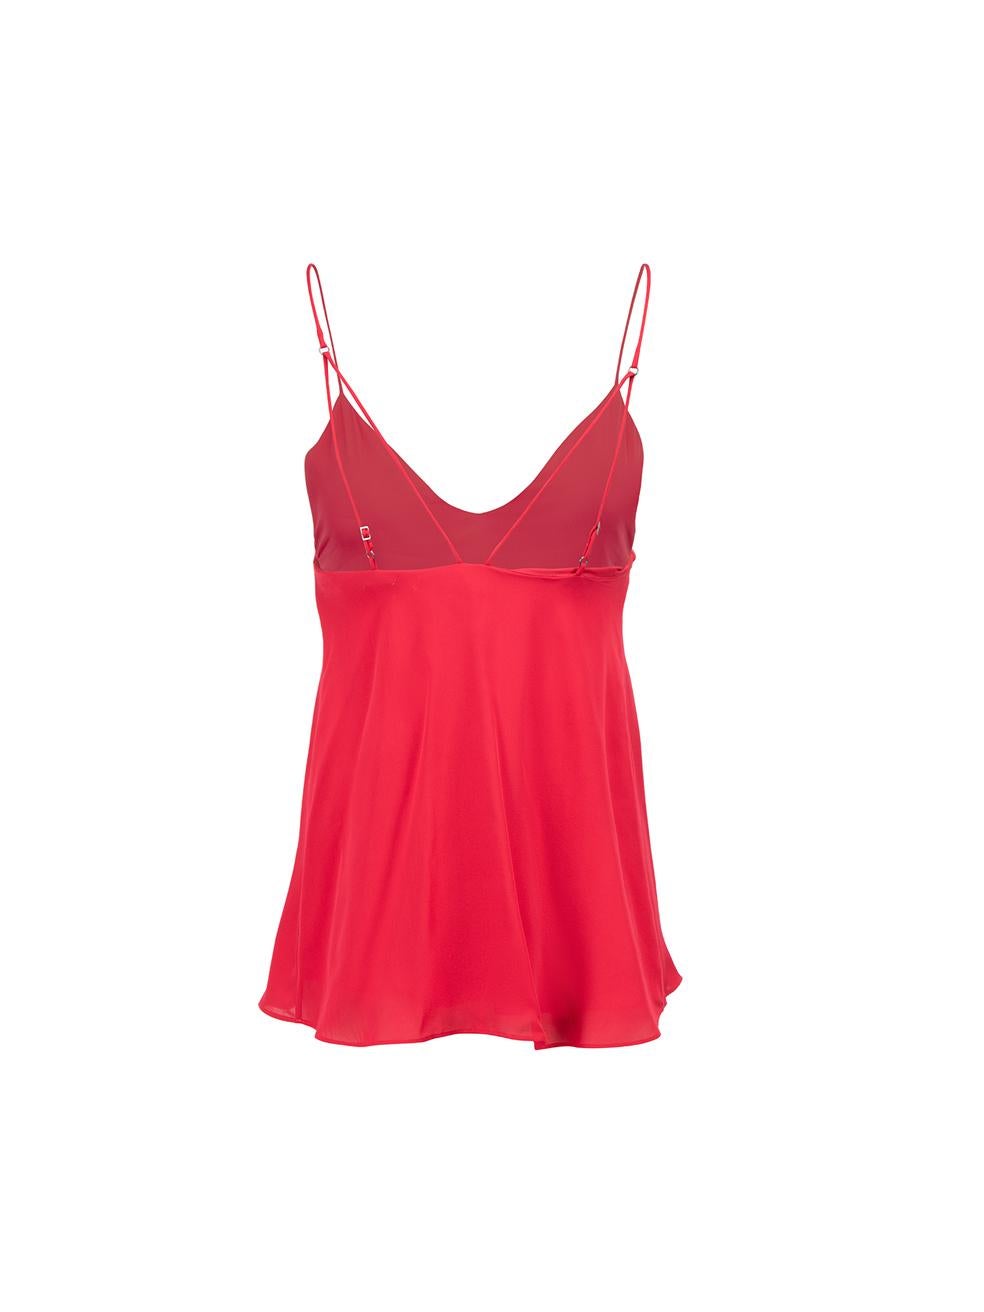 Red Silk Spaghetti Strap Tank Top Size XS In Good Condition For Sale In London, GB